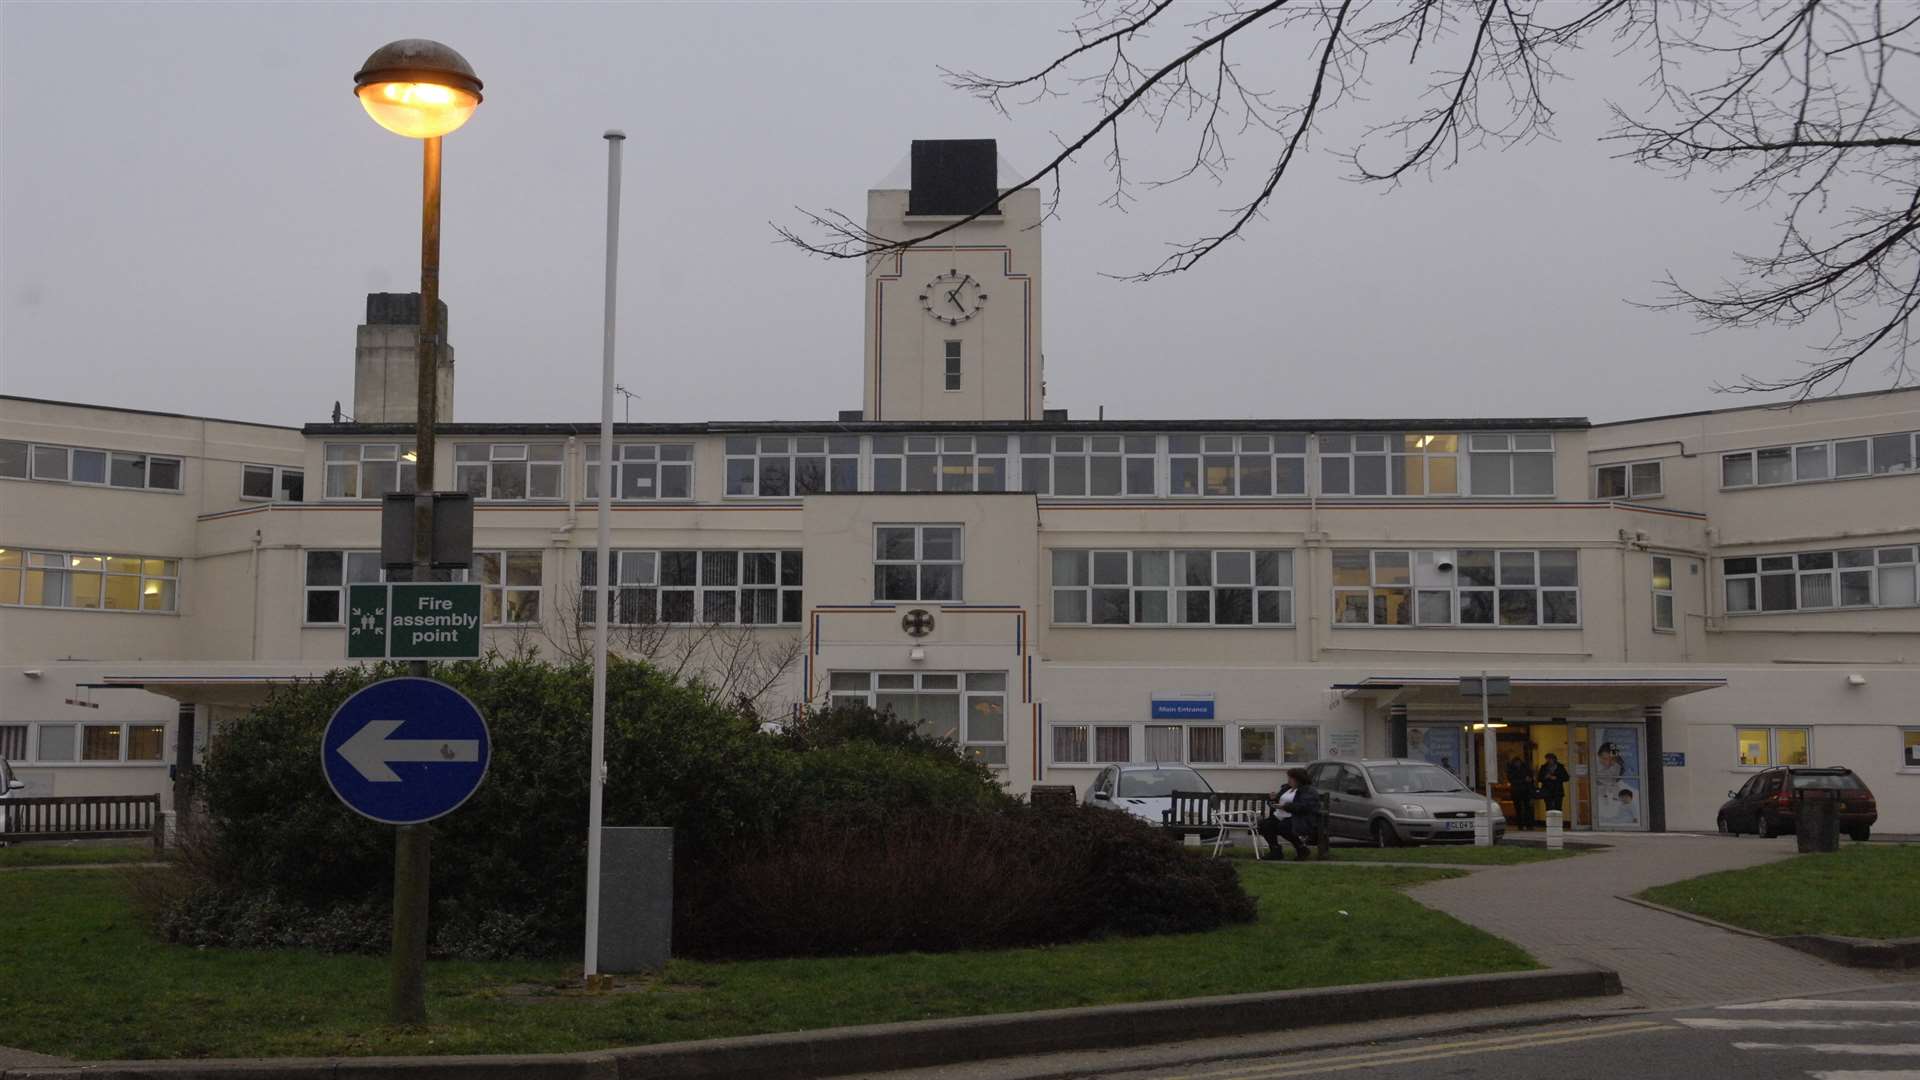 East Kent hospitals took £1.65 million in parking charges from its staff in 2016/17. Picture: Chris Davey